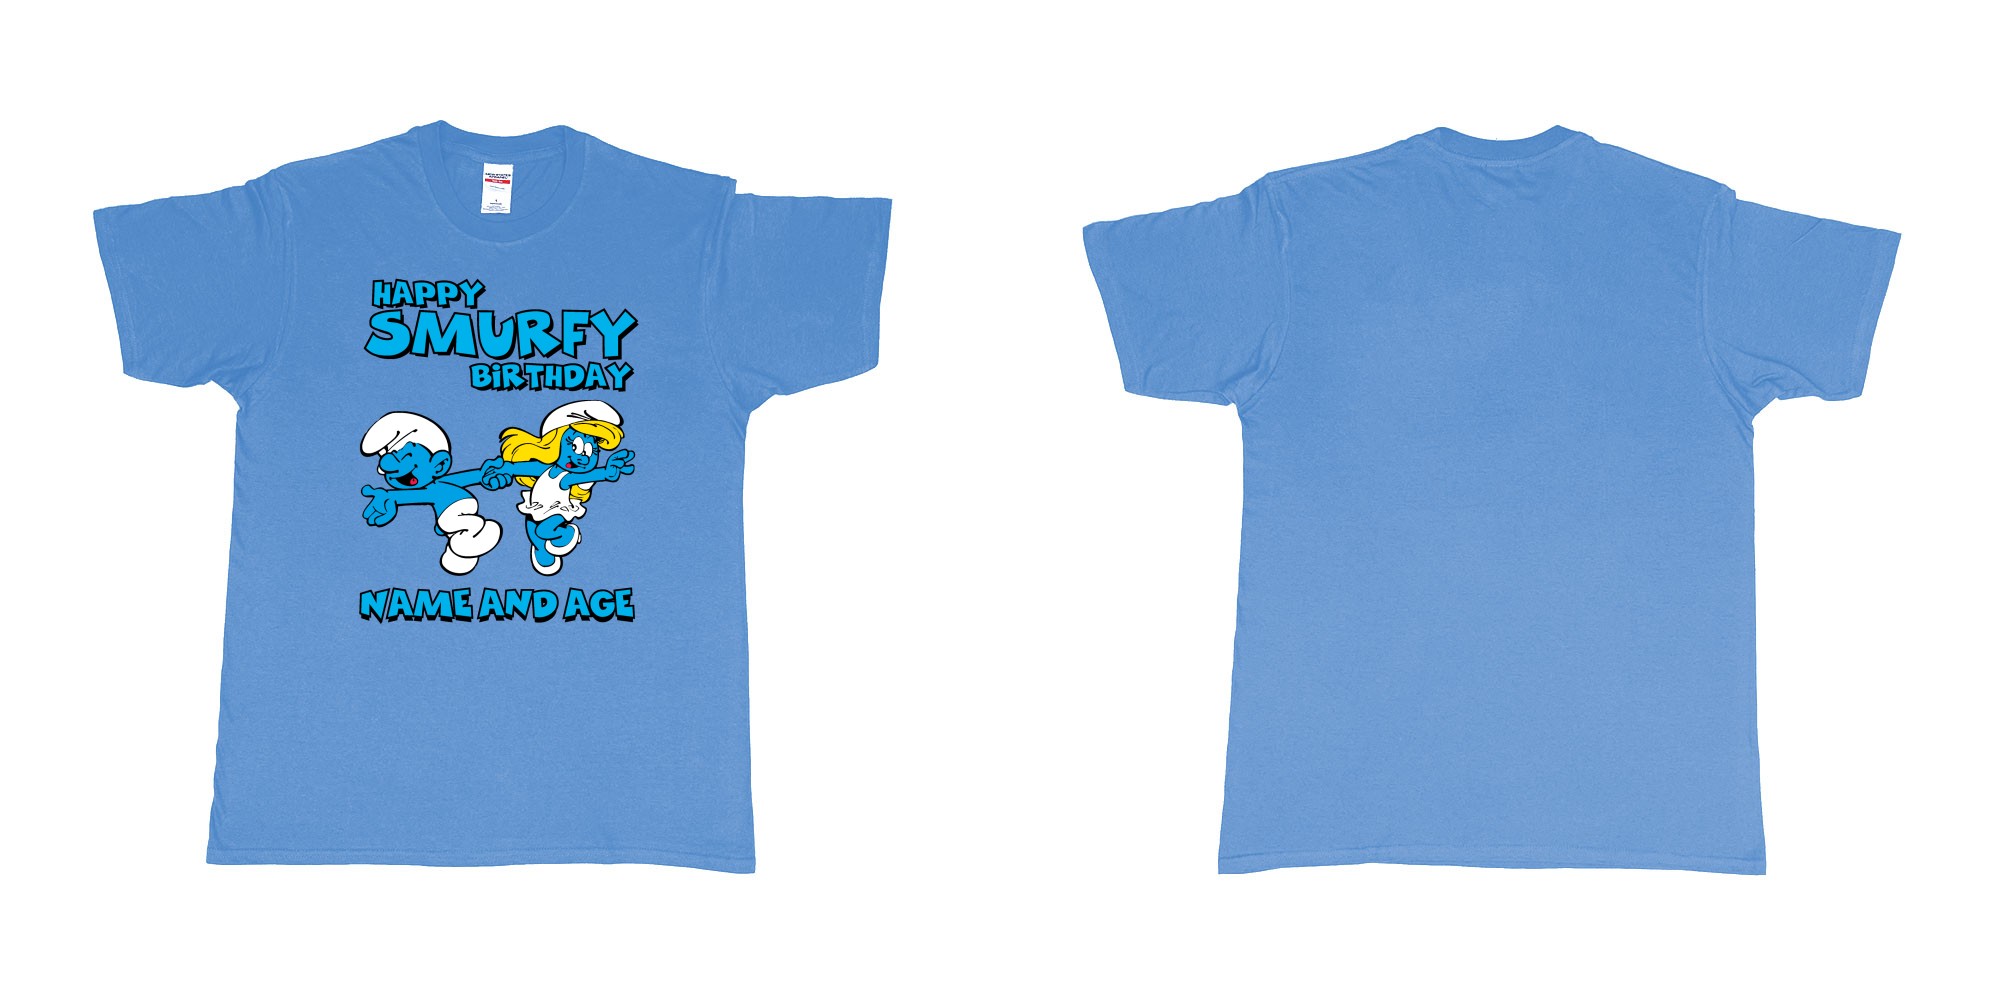 Custom tshirt design happy smurfy birthday in fabric color carolina-blue choice your own text made in Bali by The Pirate Way